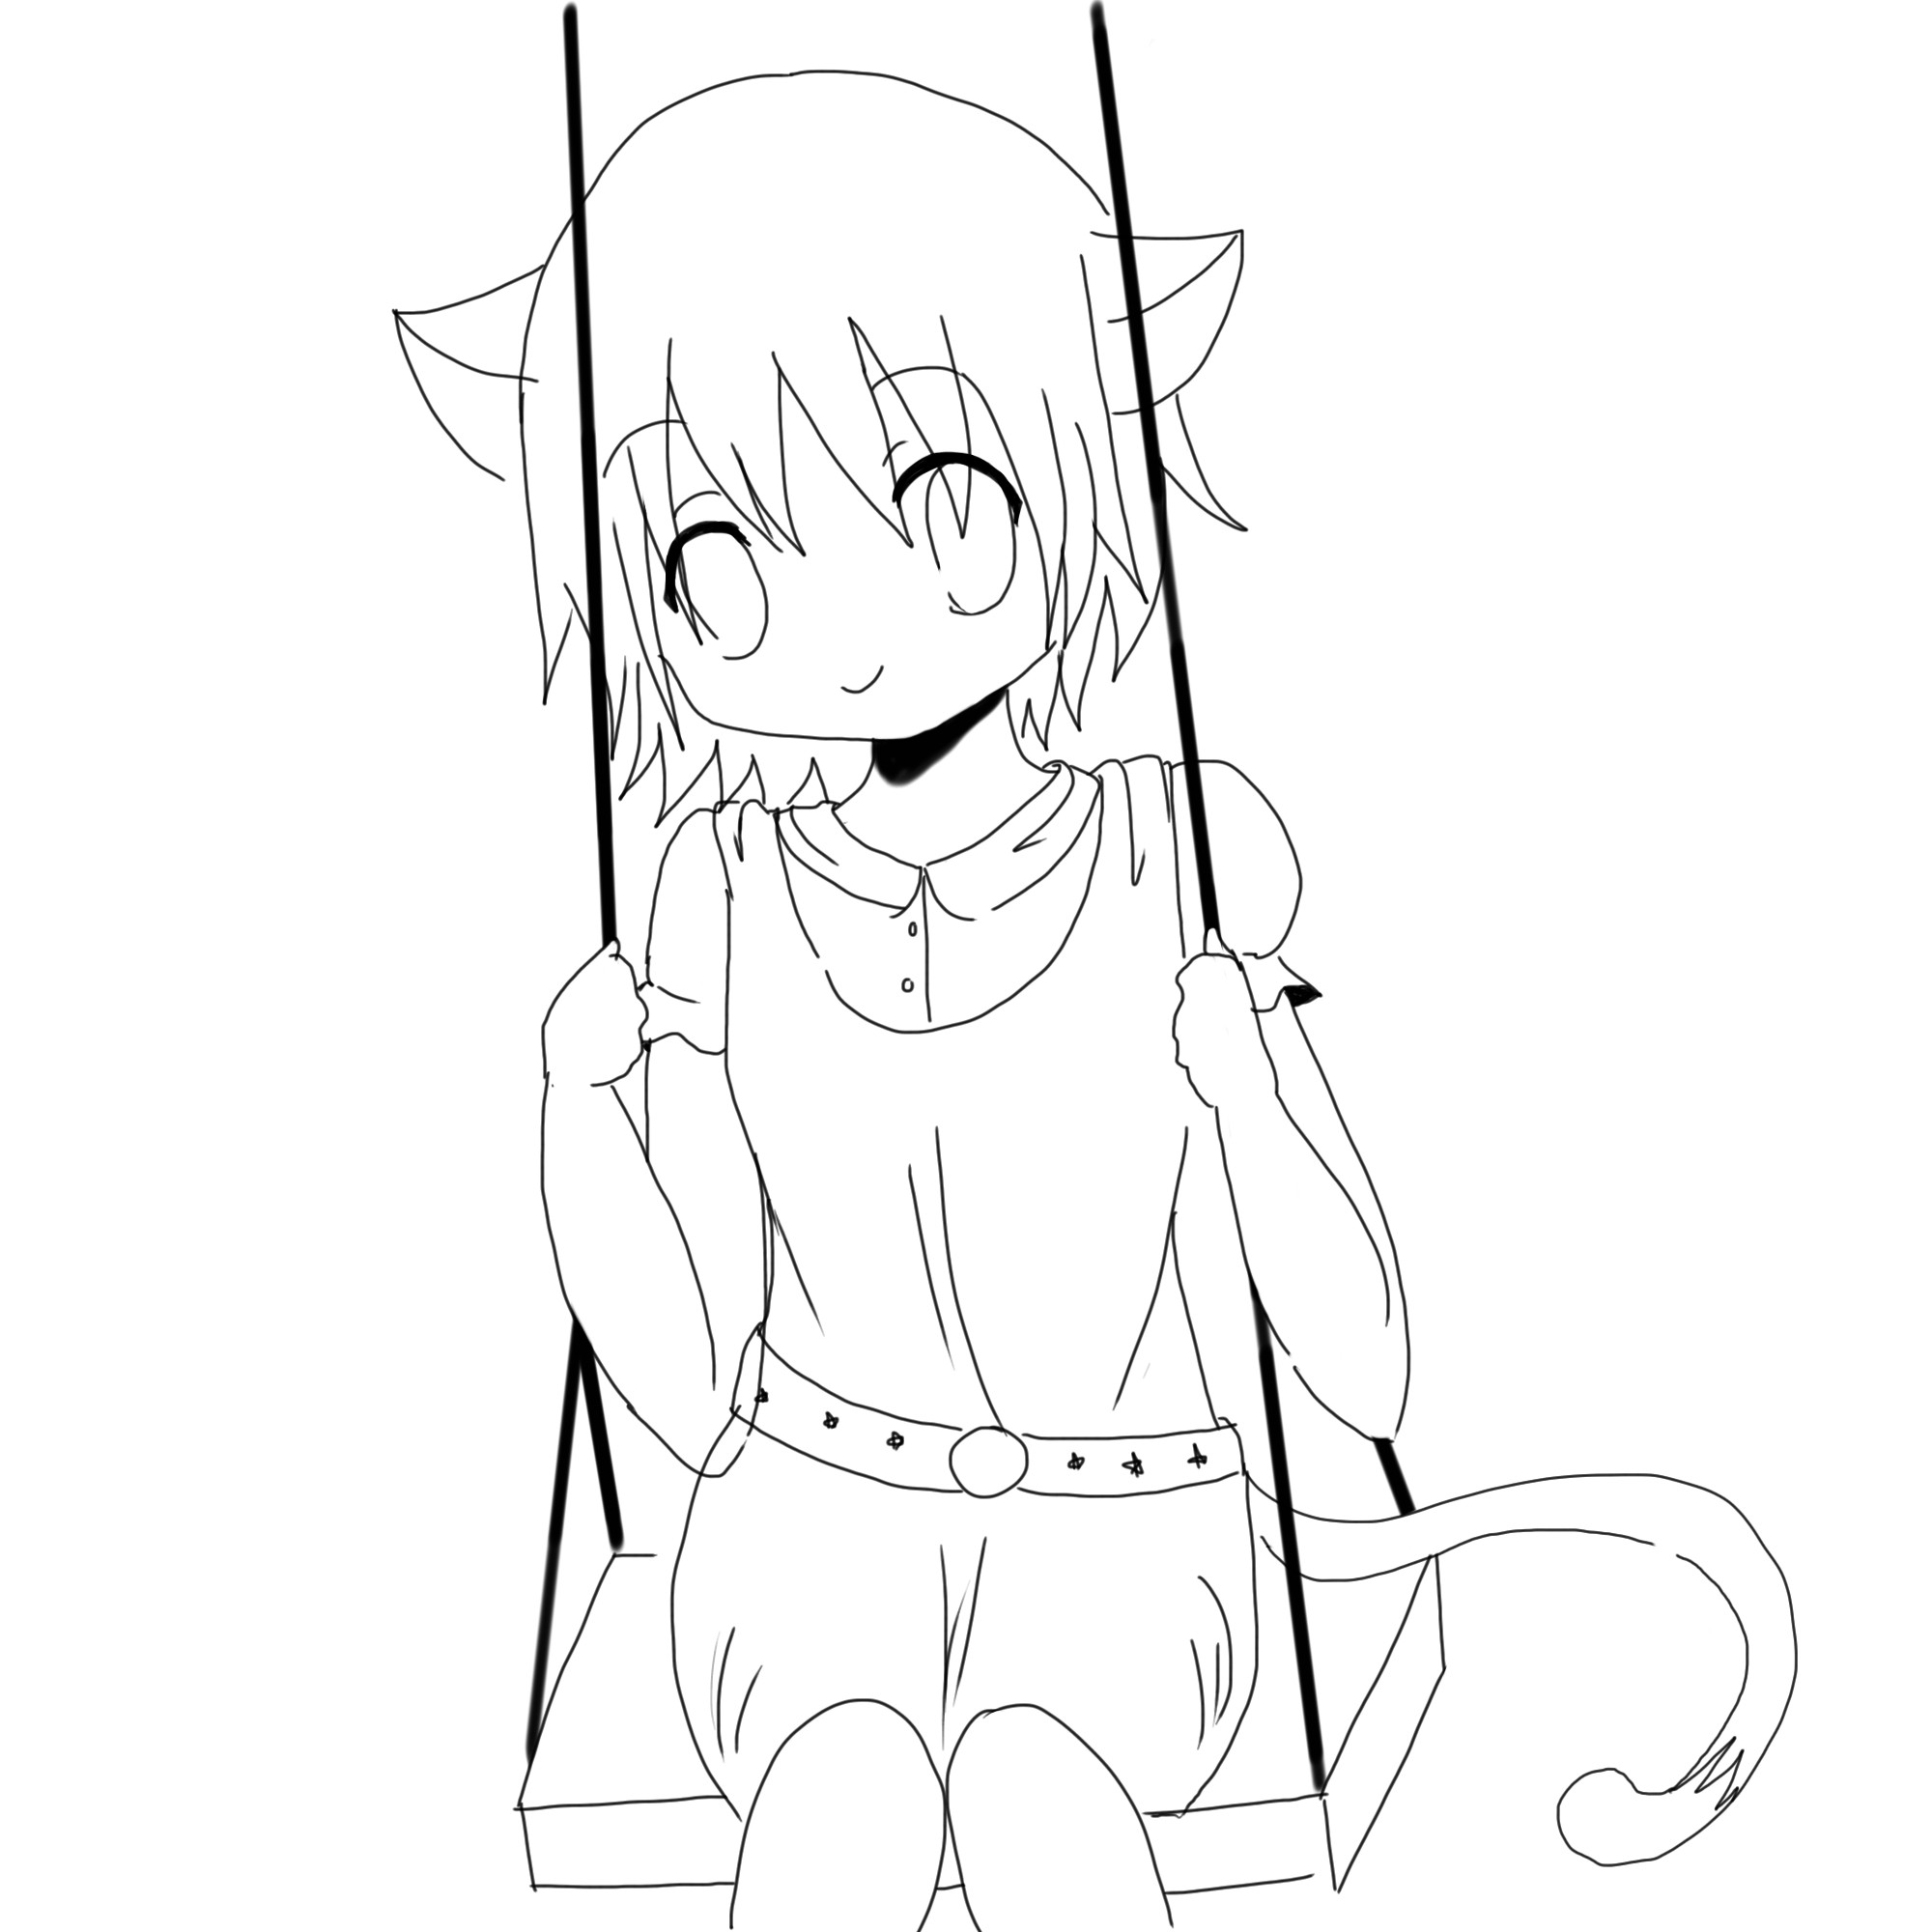 Cute Anime Girls Coloring Pages
 Cute Anime Cat Coloring Pages Neko Girl Lineart By